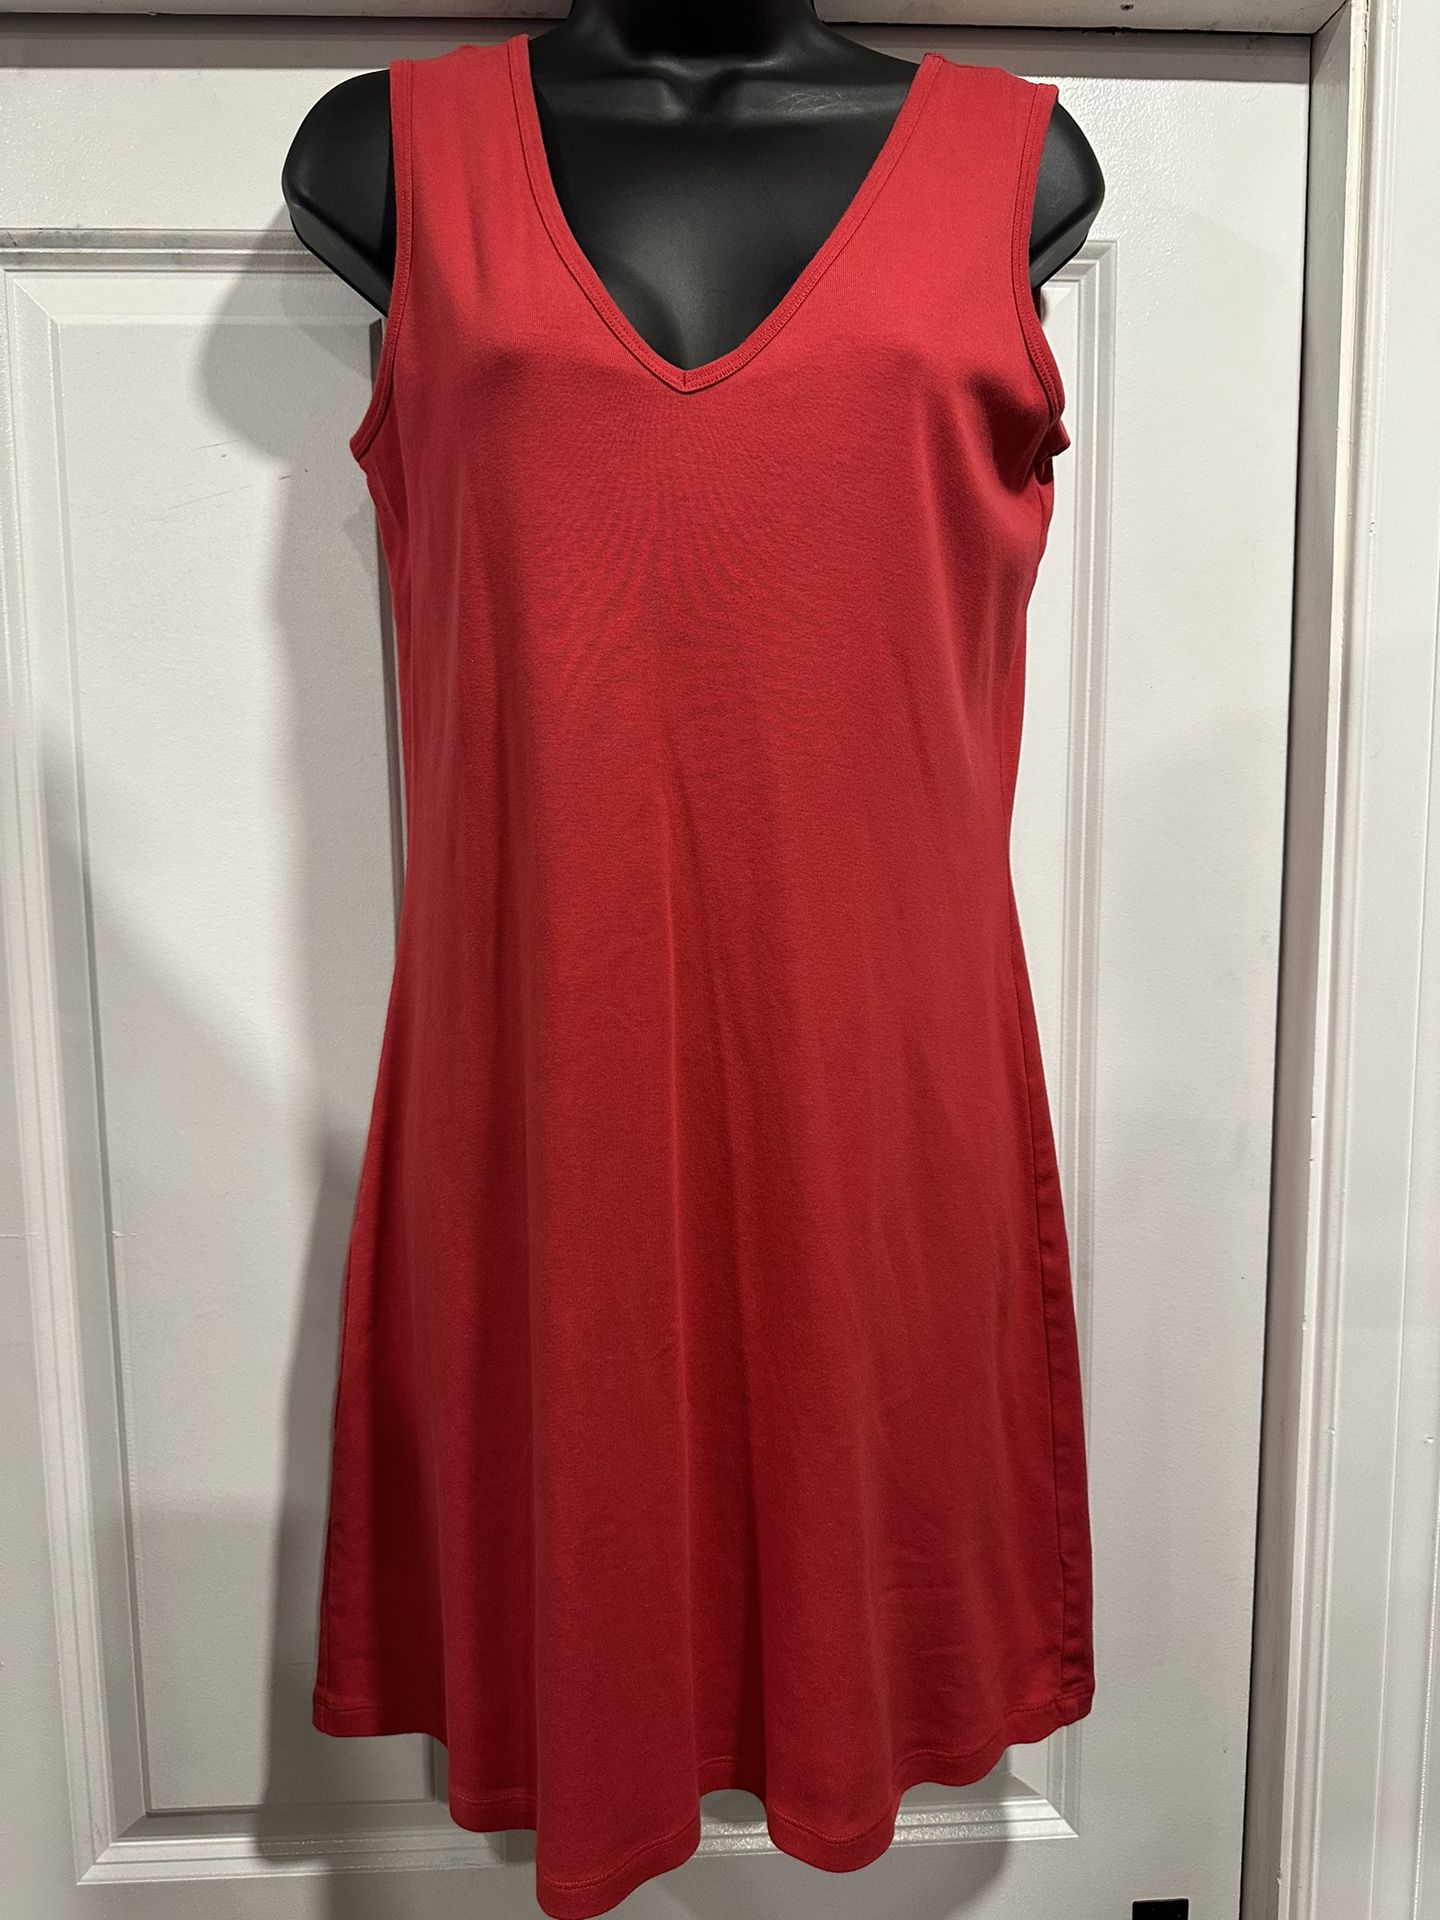 Vibrant Red Sleeveless A-Line Dress - Size Large